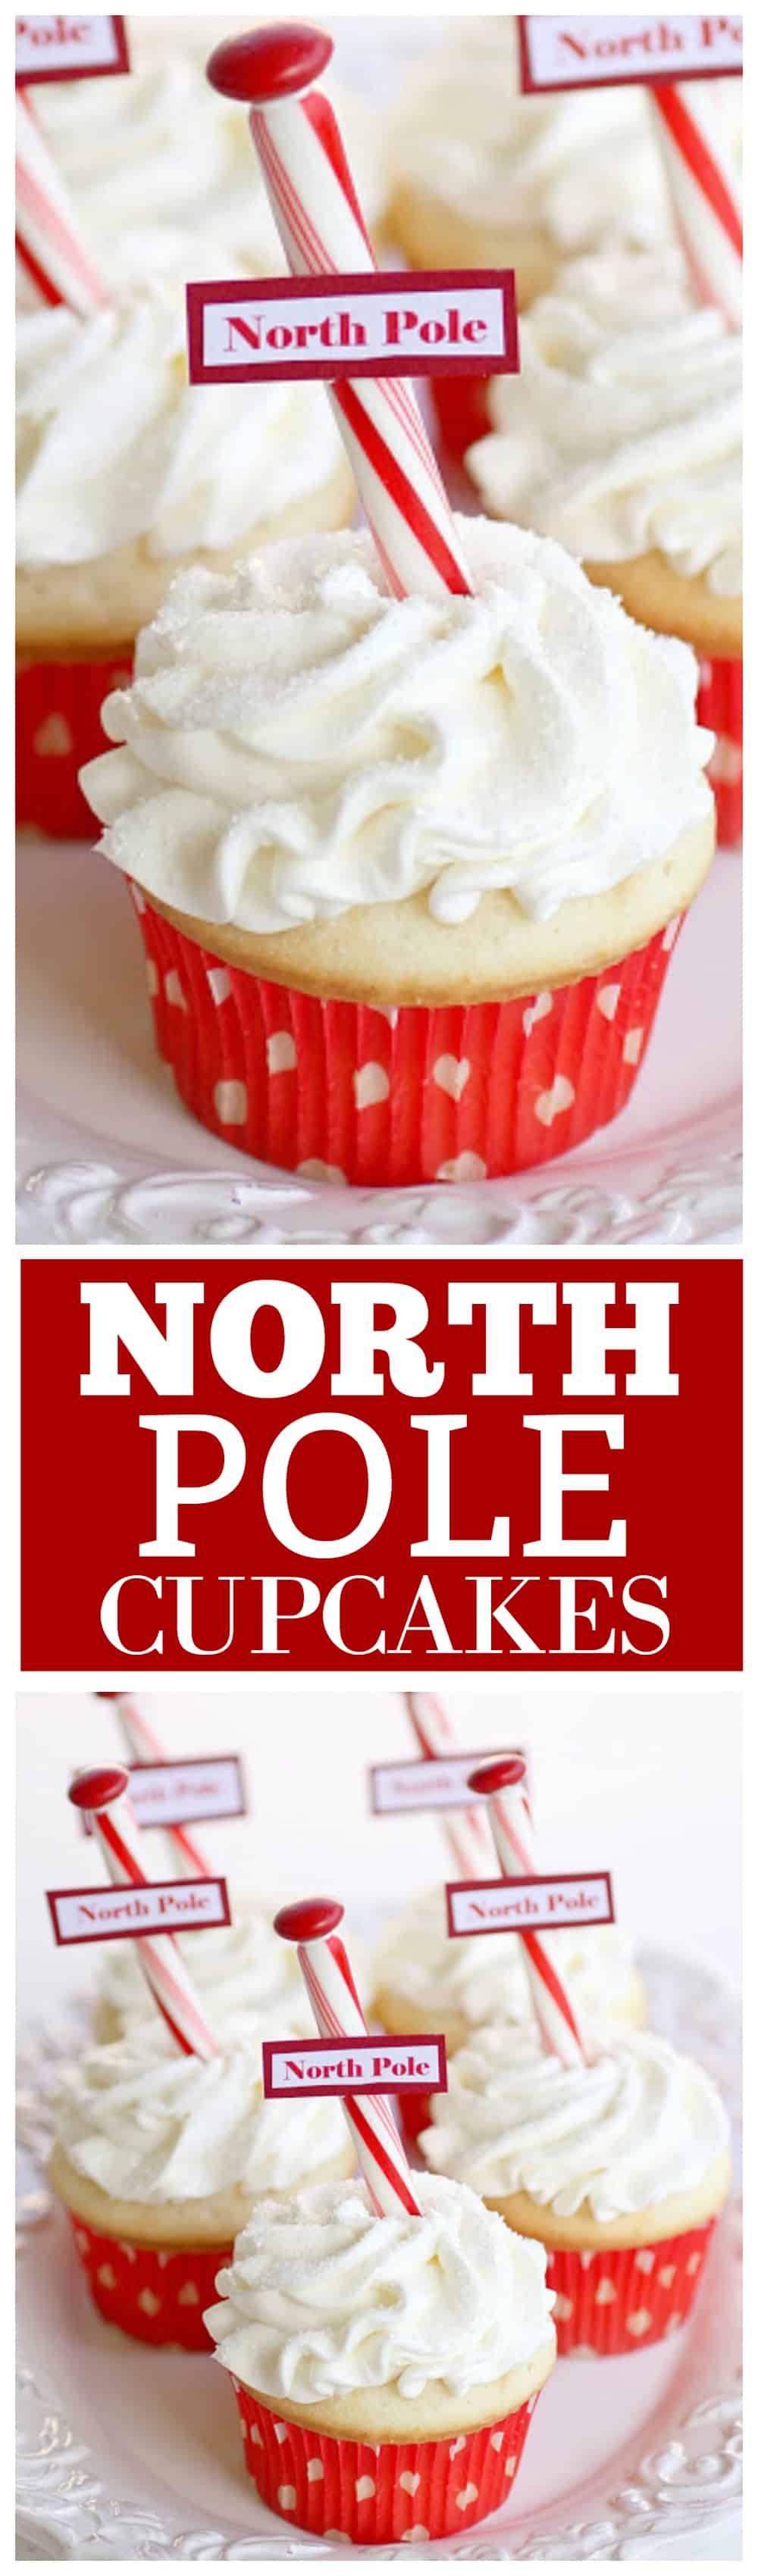 North Pole Cupcakes - simple and easy Christmas cupcakes that are so festive! #north #pole #cupcakes #christmas #dessert